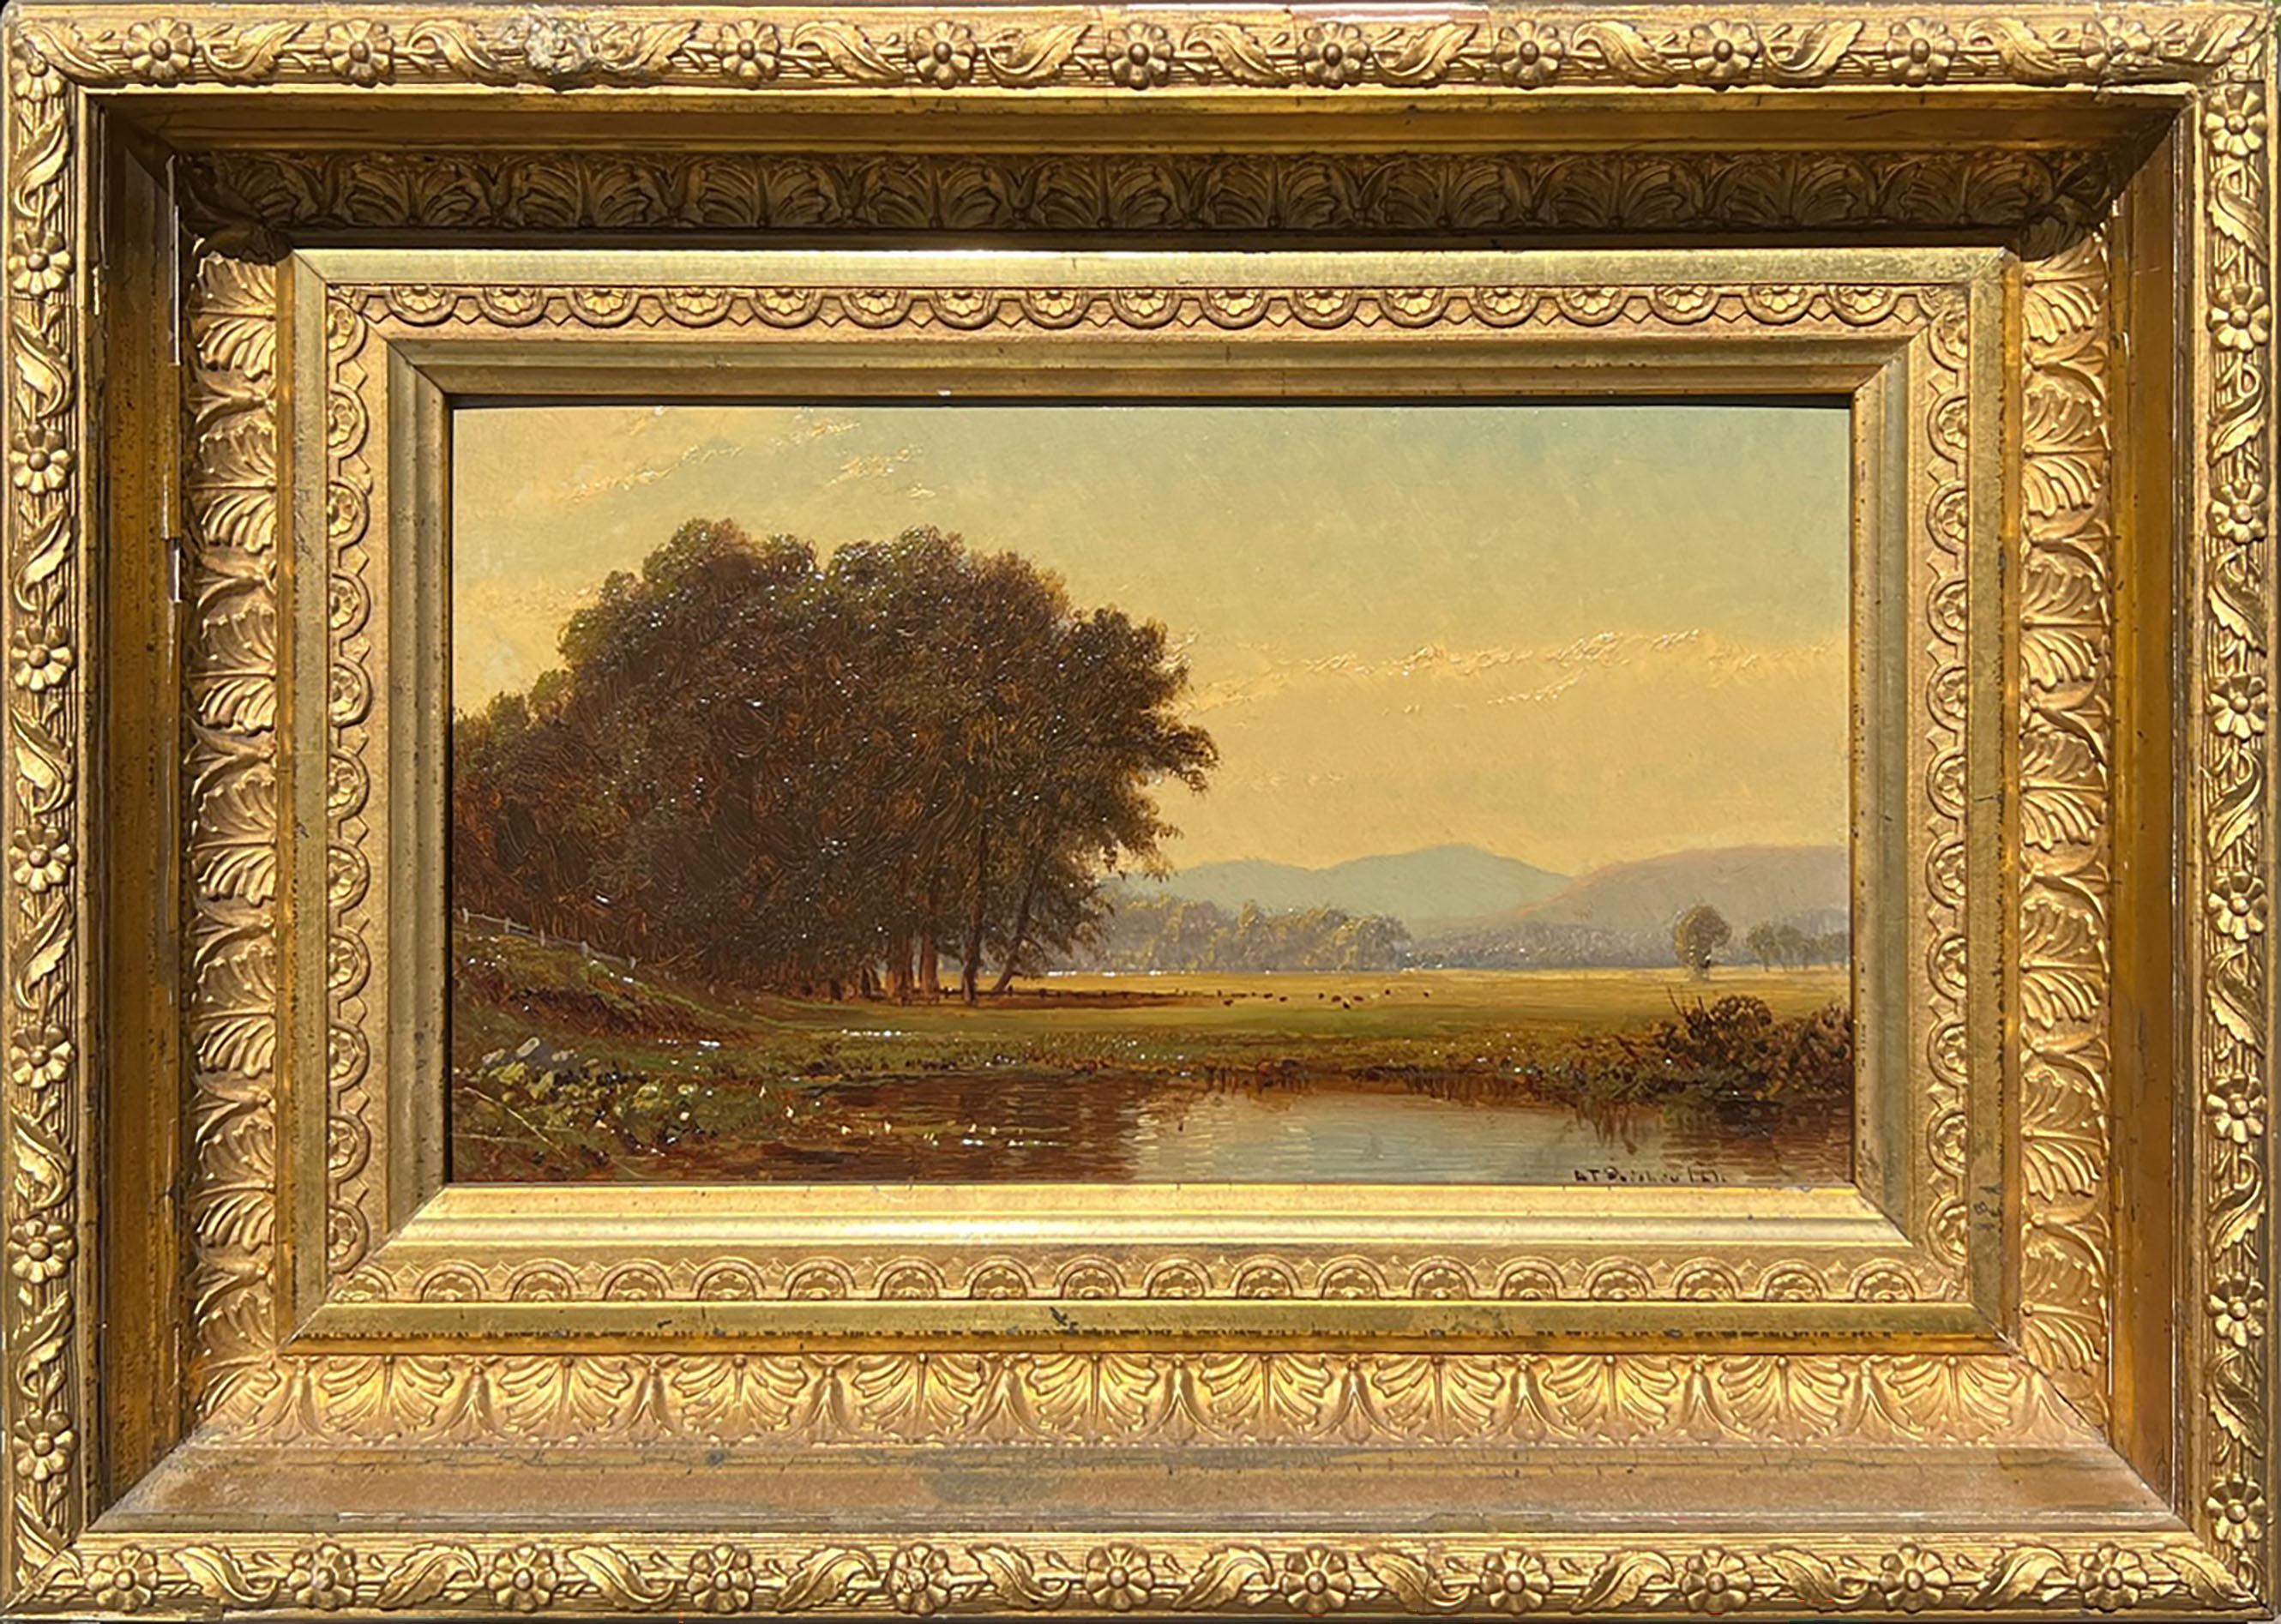 Painted by Hudson River School artist Alfred Thompson Bricher (1837-1908) , "Scene in the White Mountains" is oil on panel, measures 5.5 x 9.75 inches, and is signed and dated 1864 at the lower right. The work is framed in a period appropriate frame